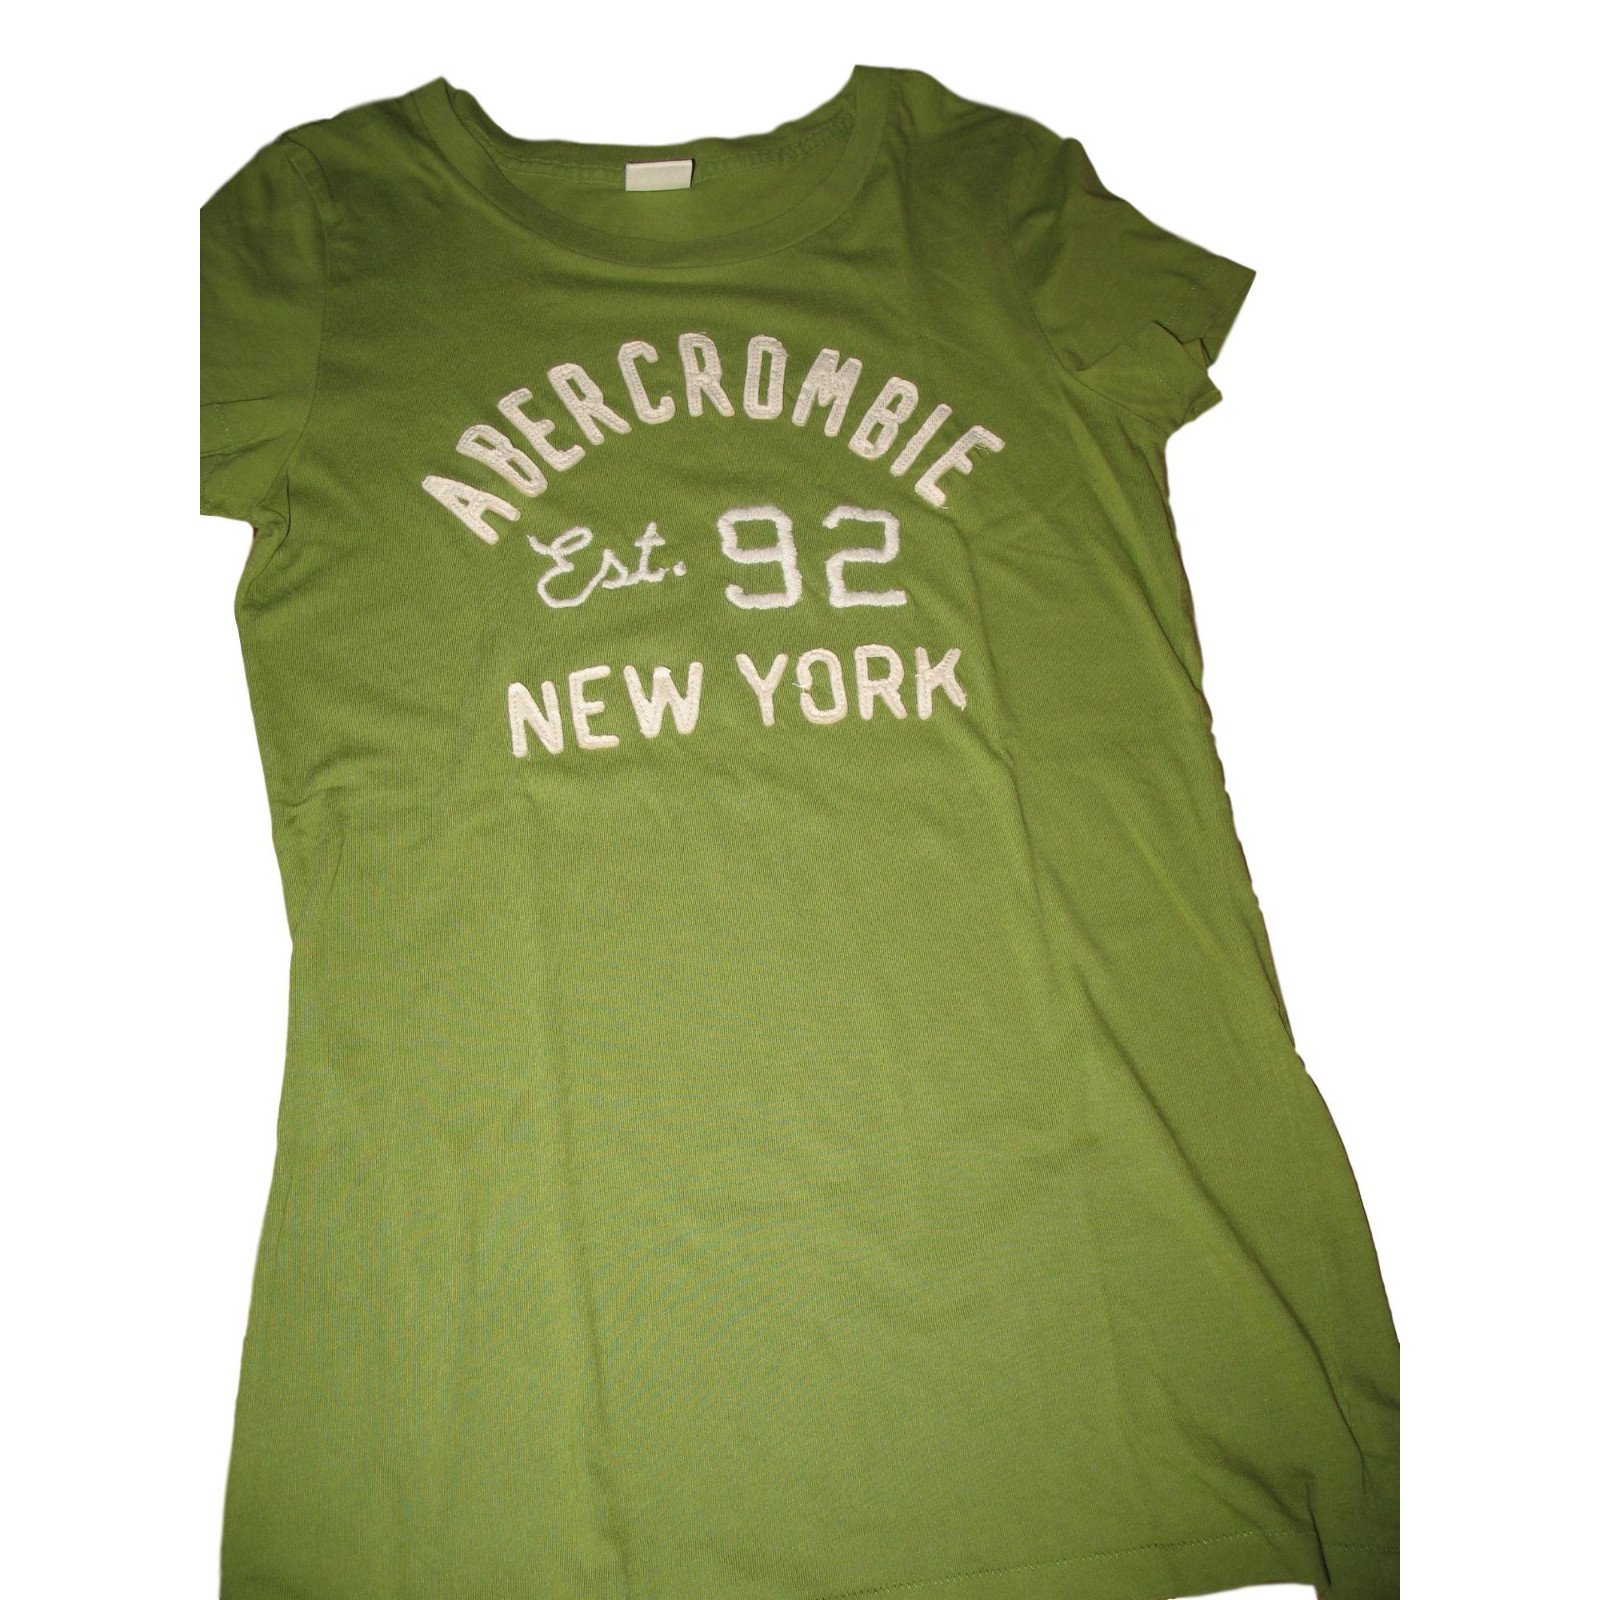 abercrombie & fitch tops